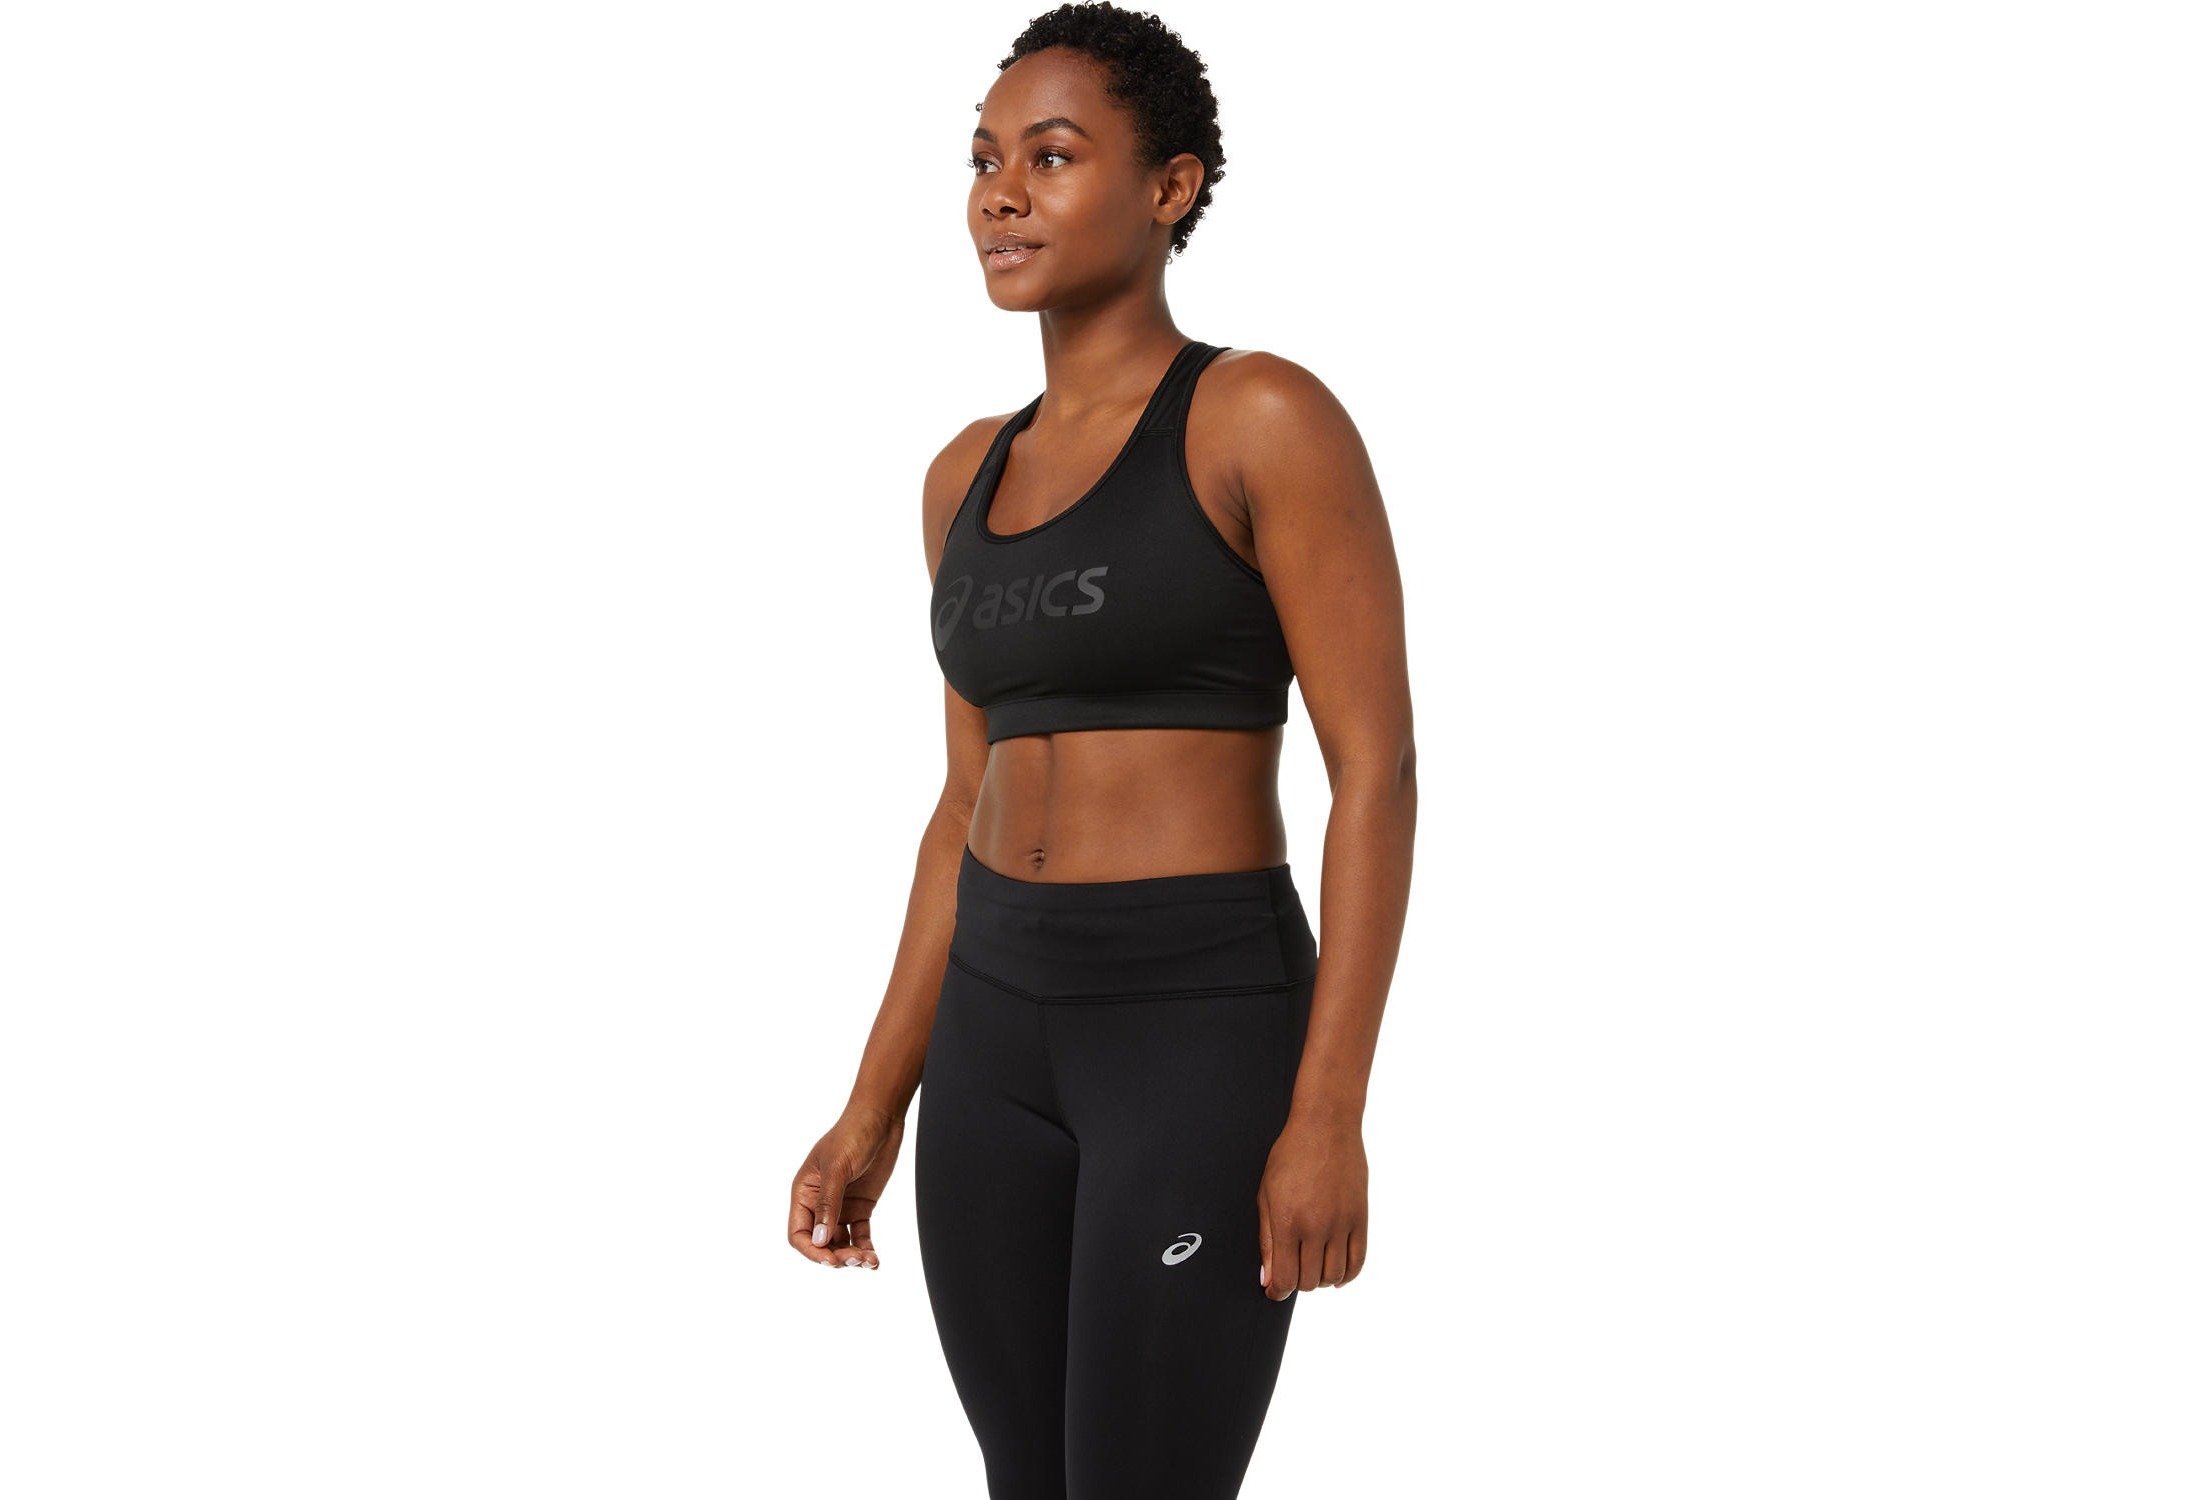  Women's Sports Bras - 42 / Women's Sports Bras / Women's Bras:  Clothing, Shoes & Jewelry